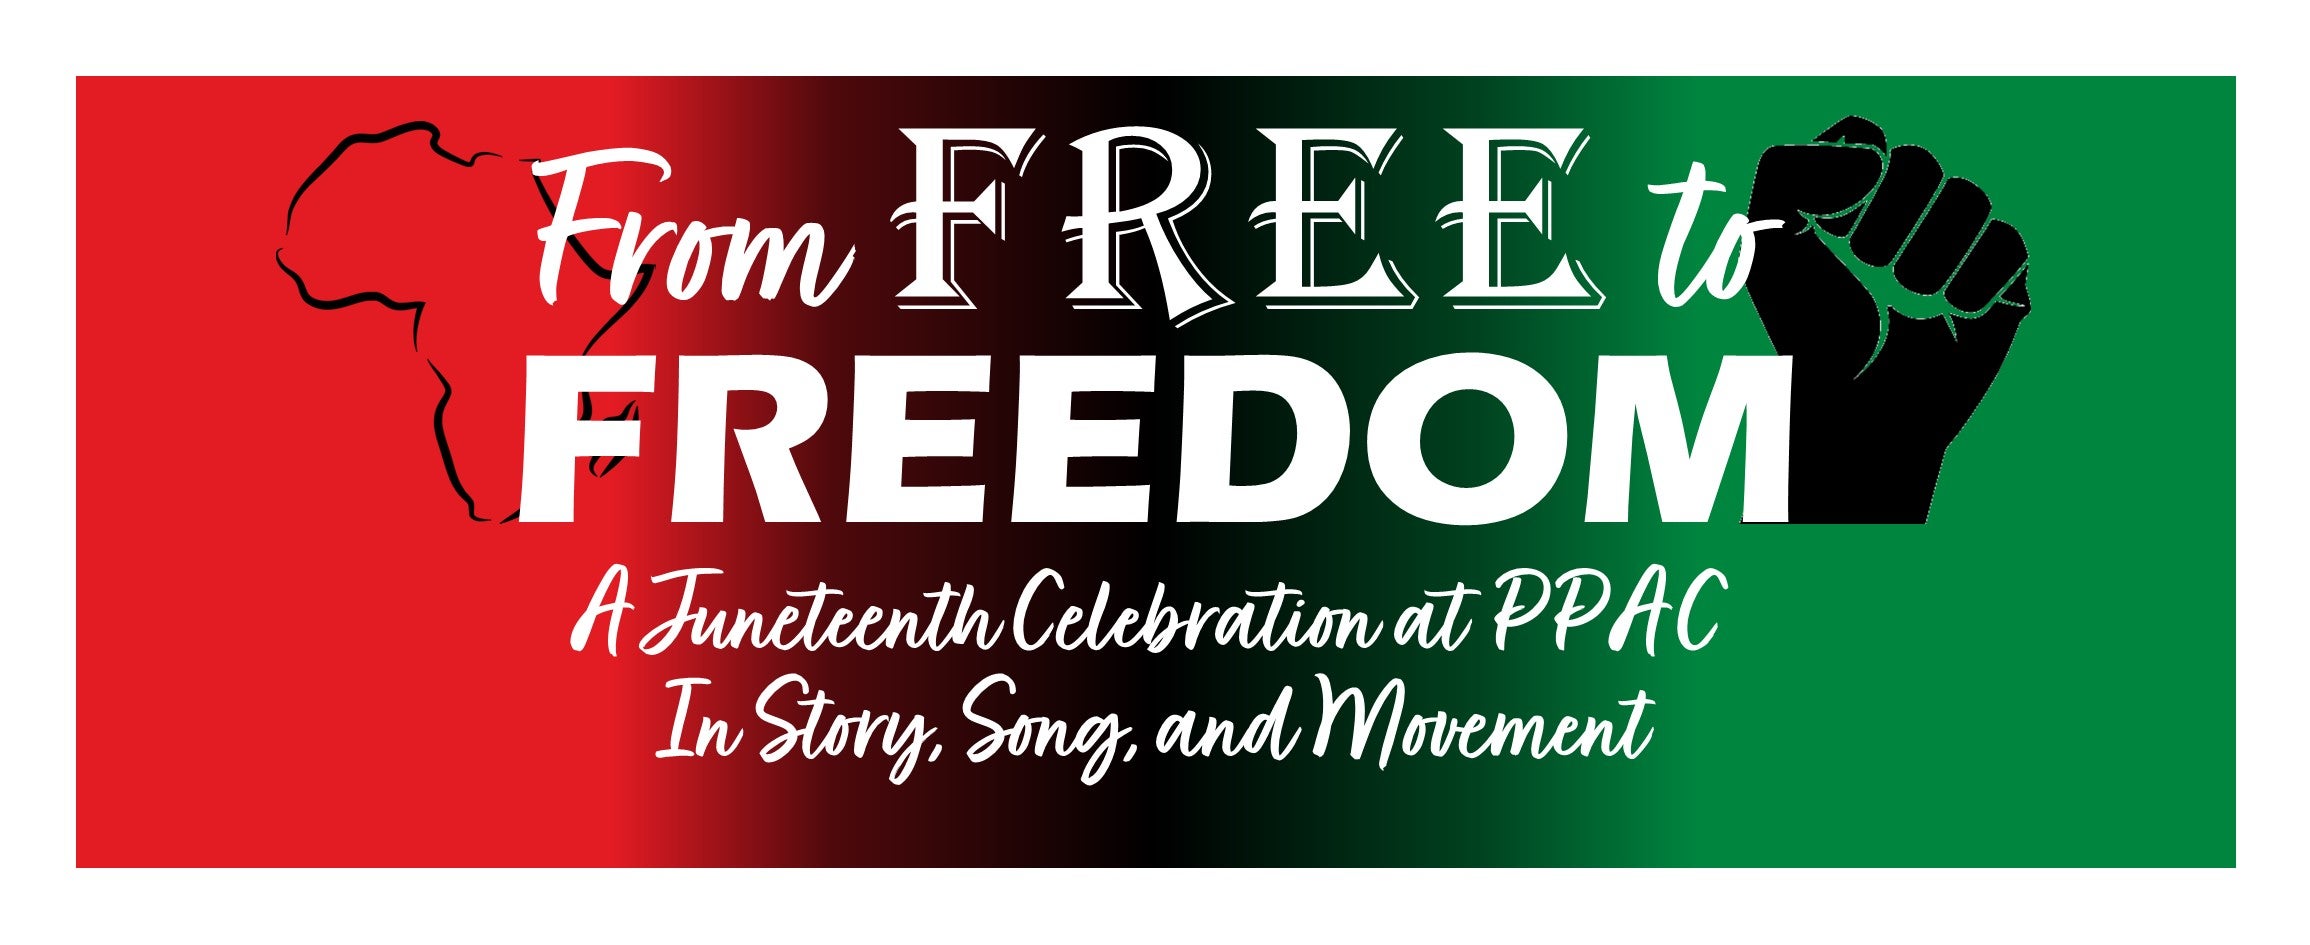 From Free to Freedom: A Juneteenth Celebration